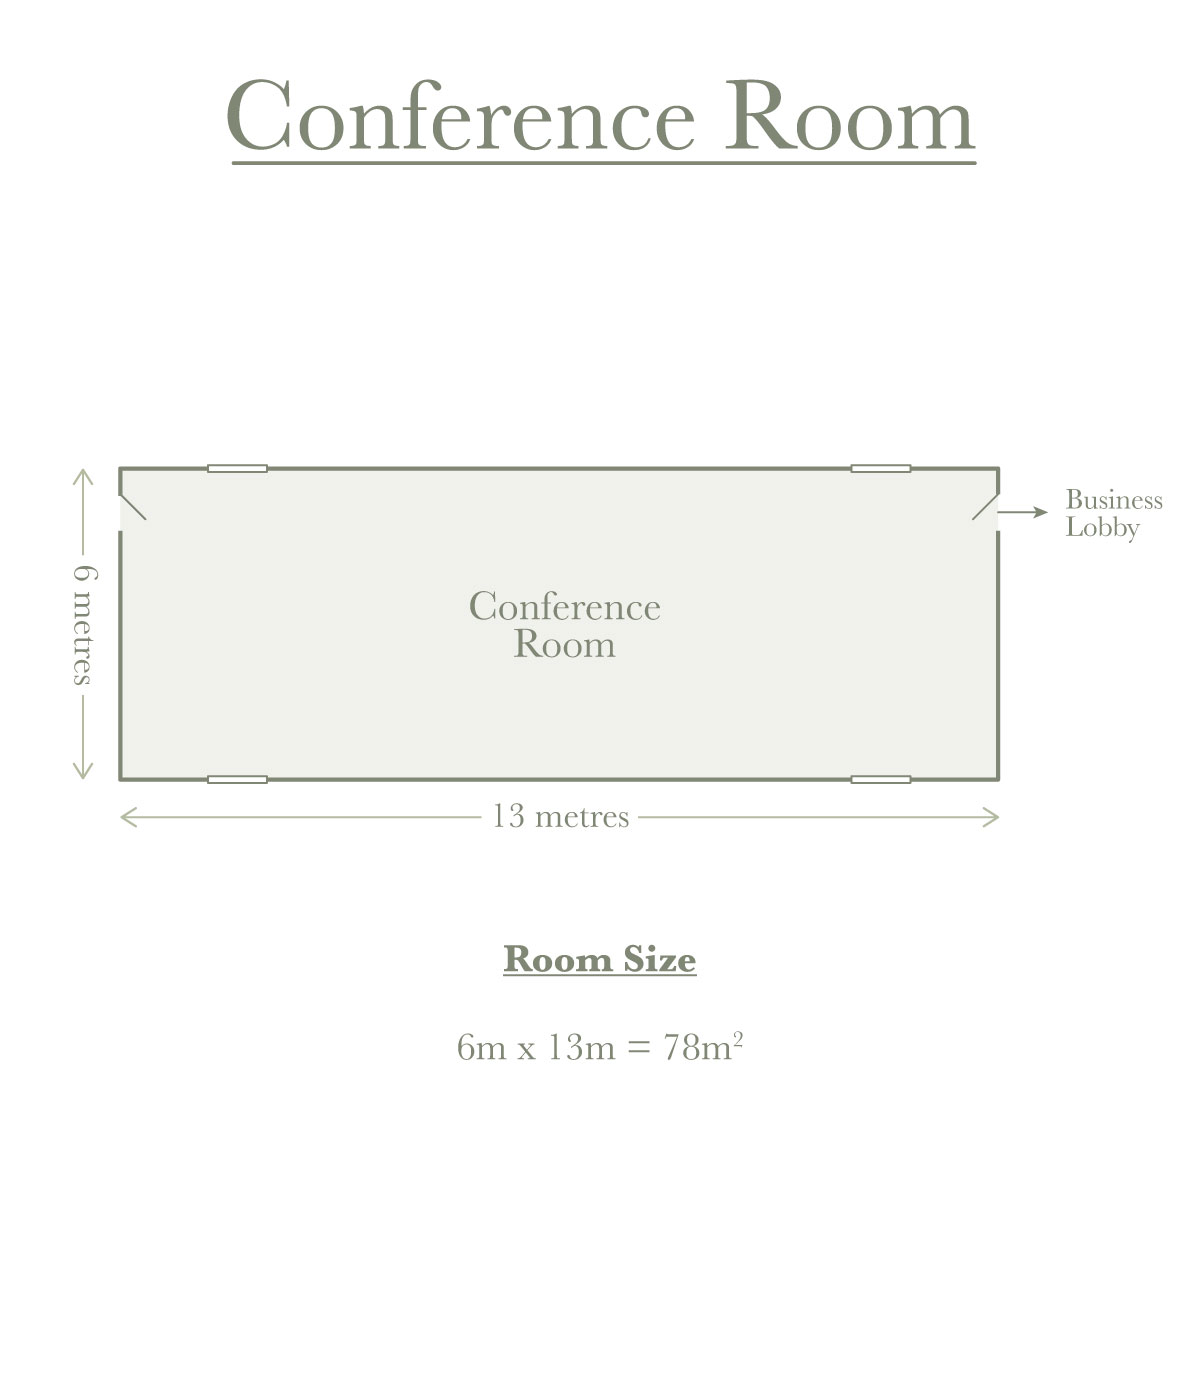 Conference Room Plan with Measurements